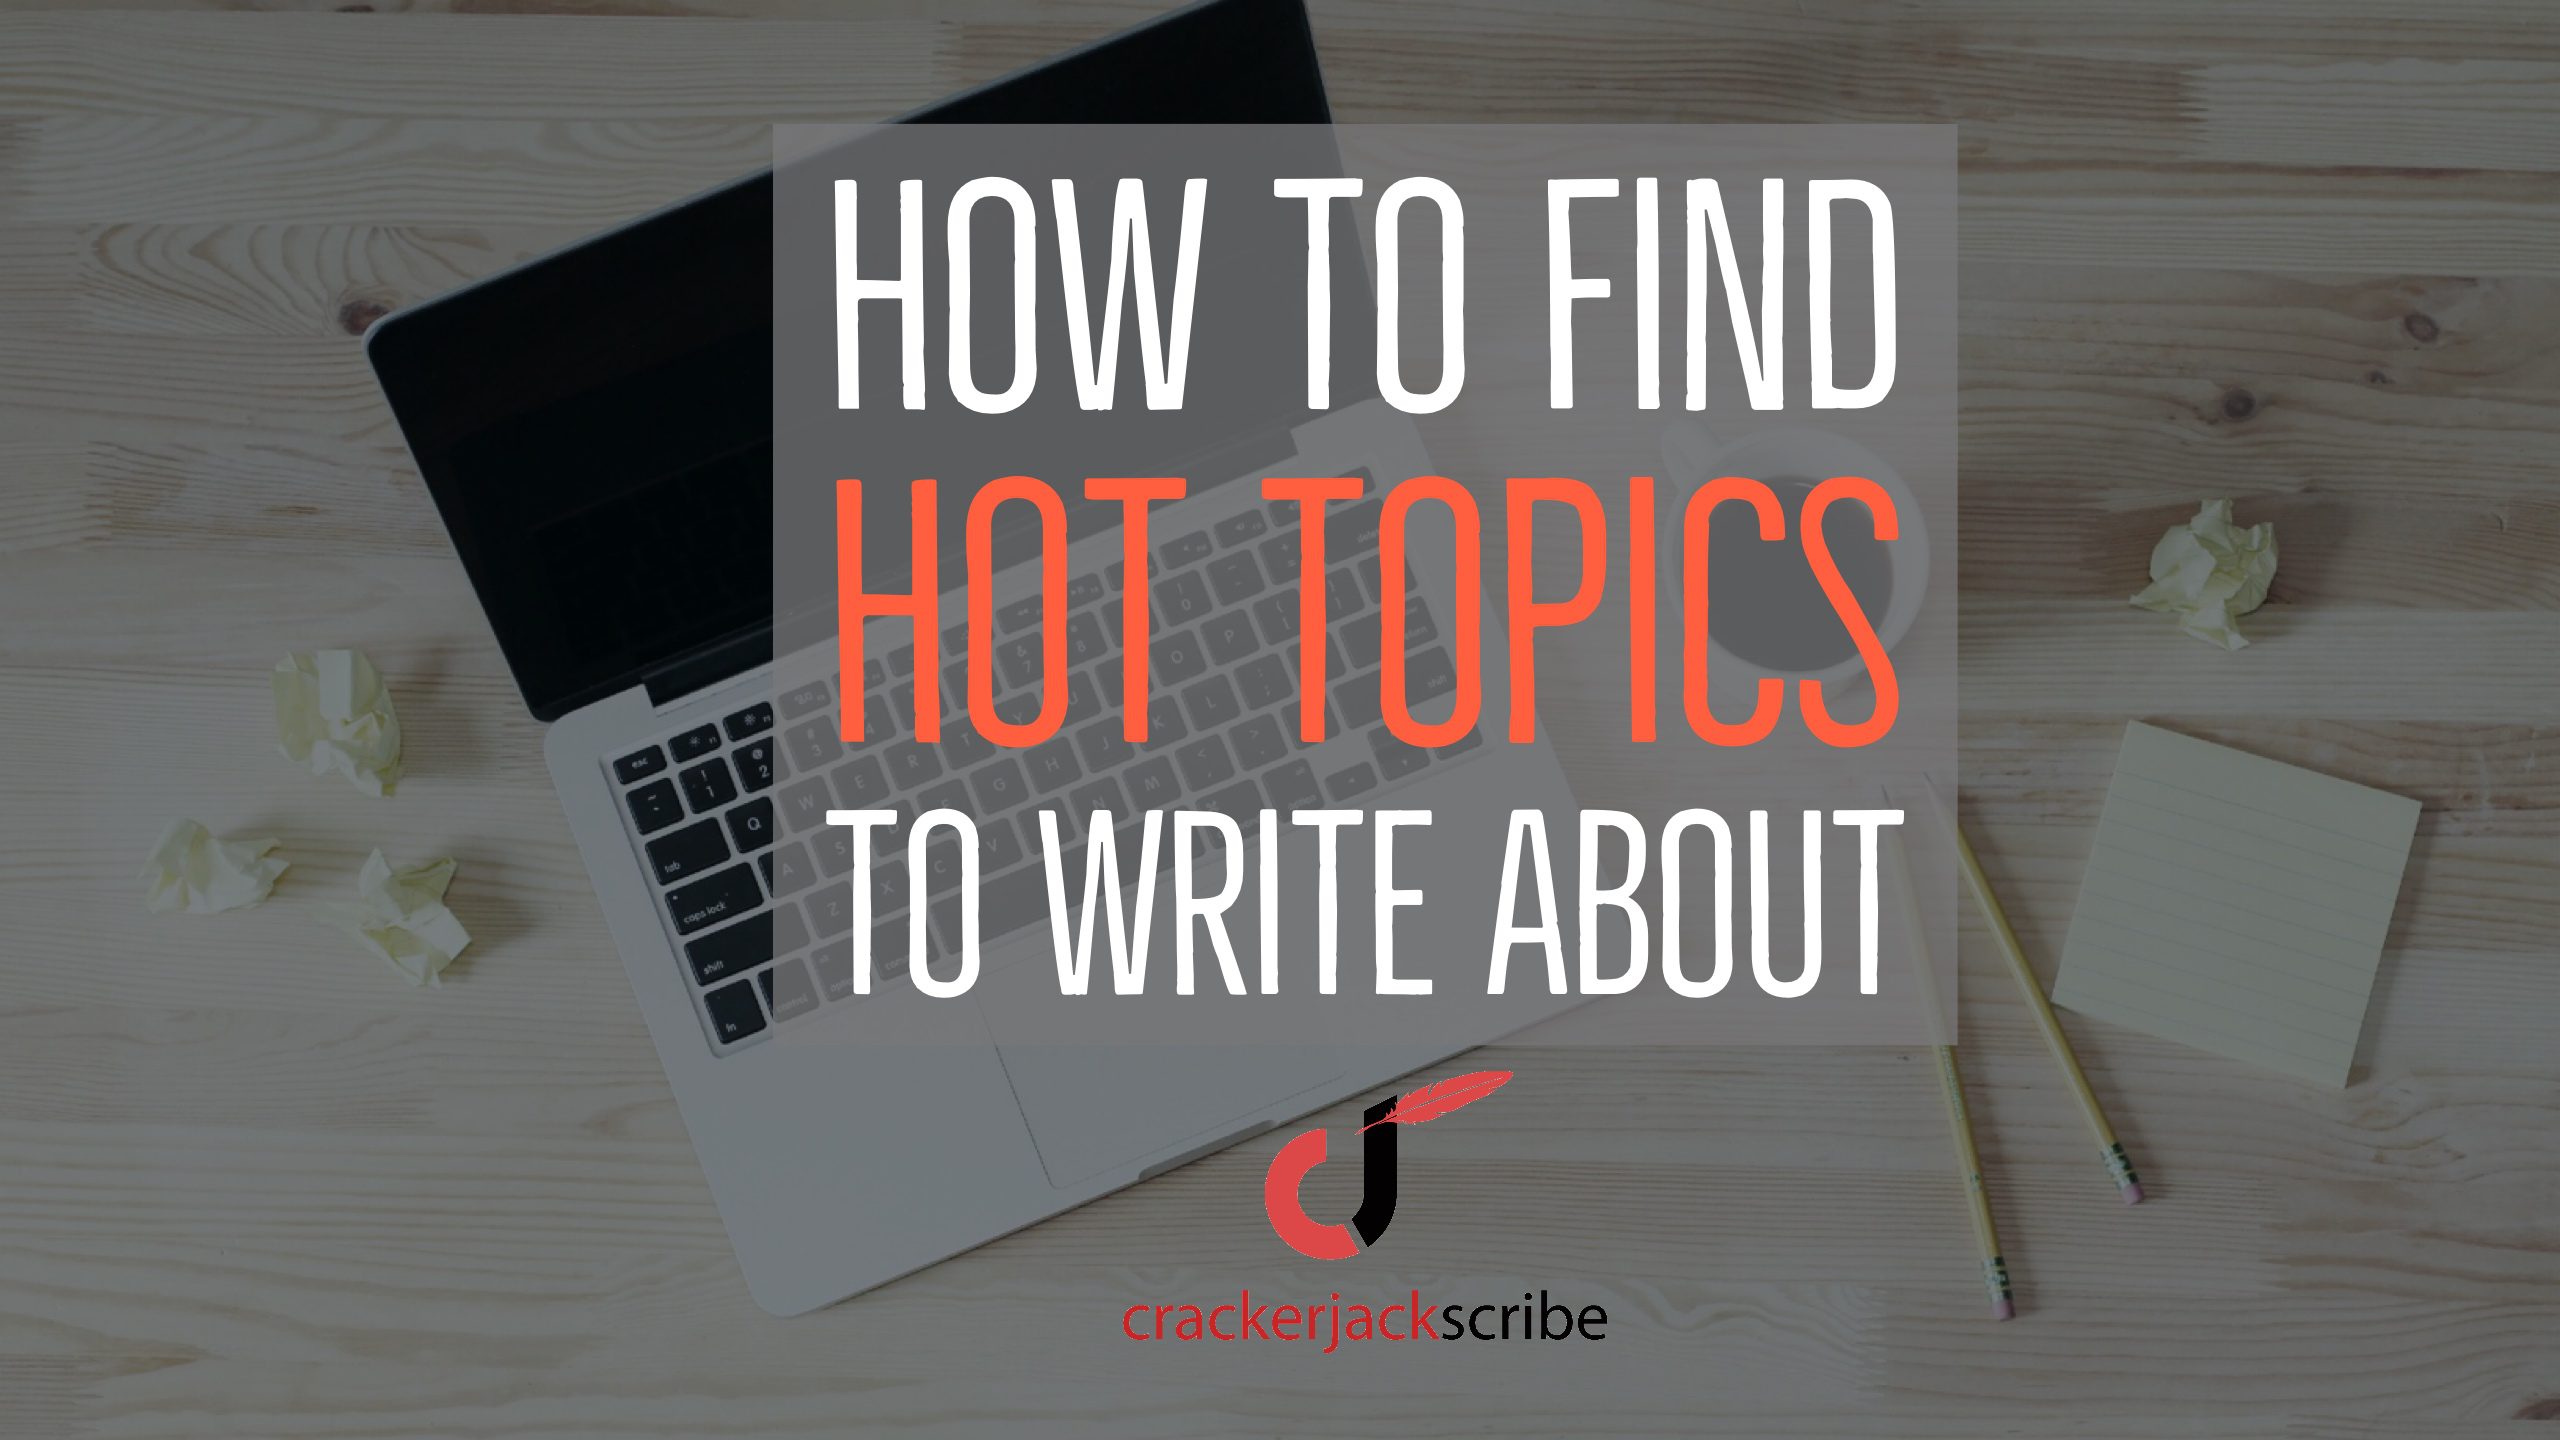 hot topics to write about